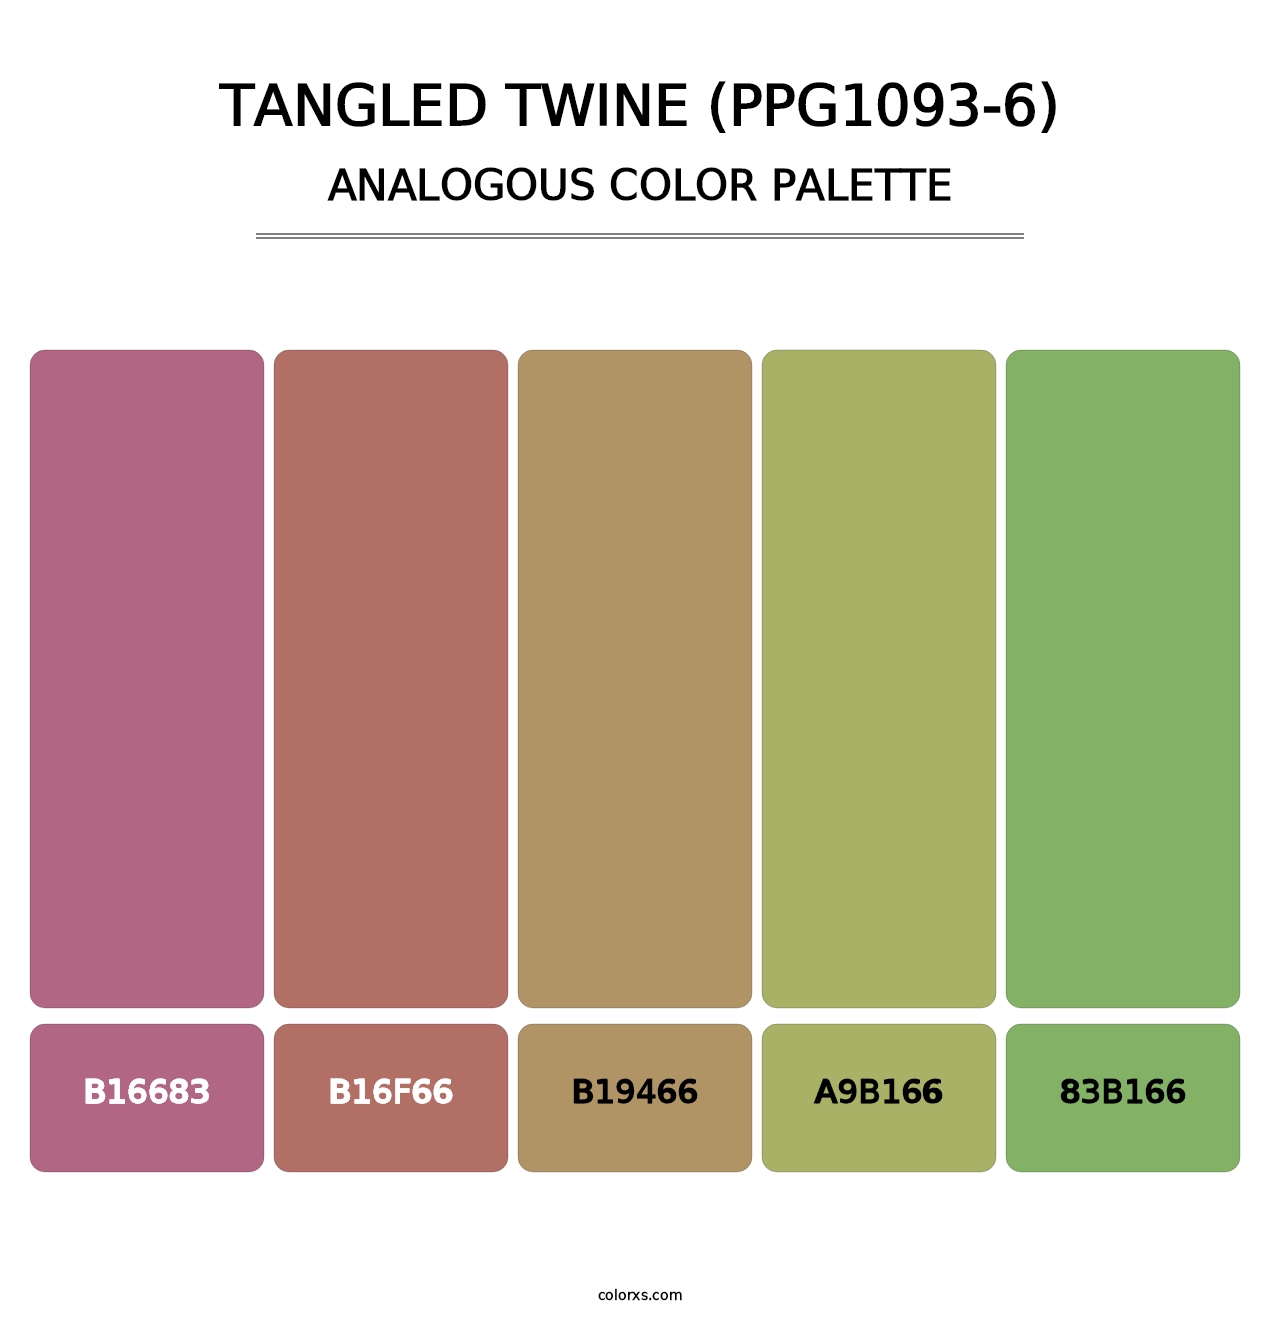 Tangled Twine (PPG1093-6) - Analogous Color Palette